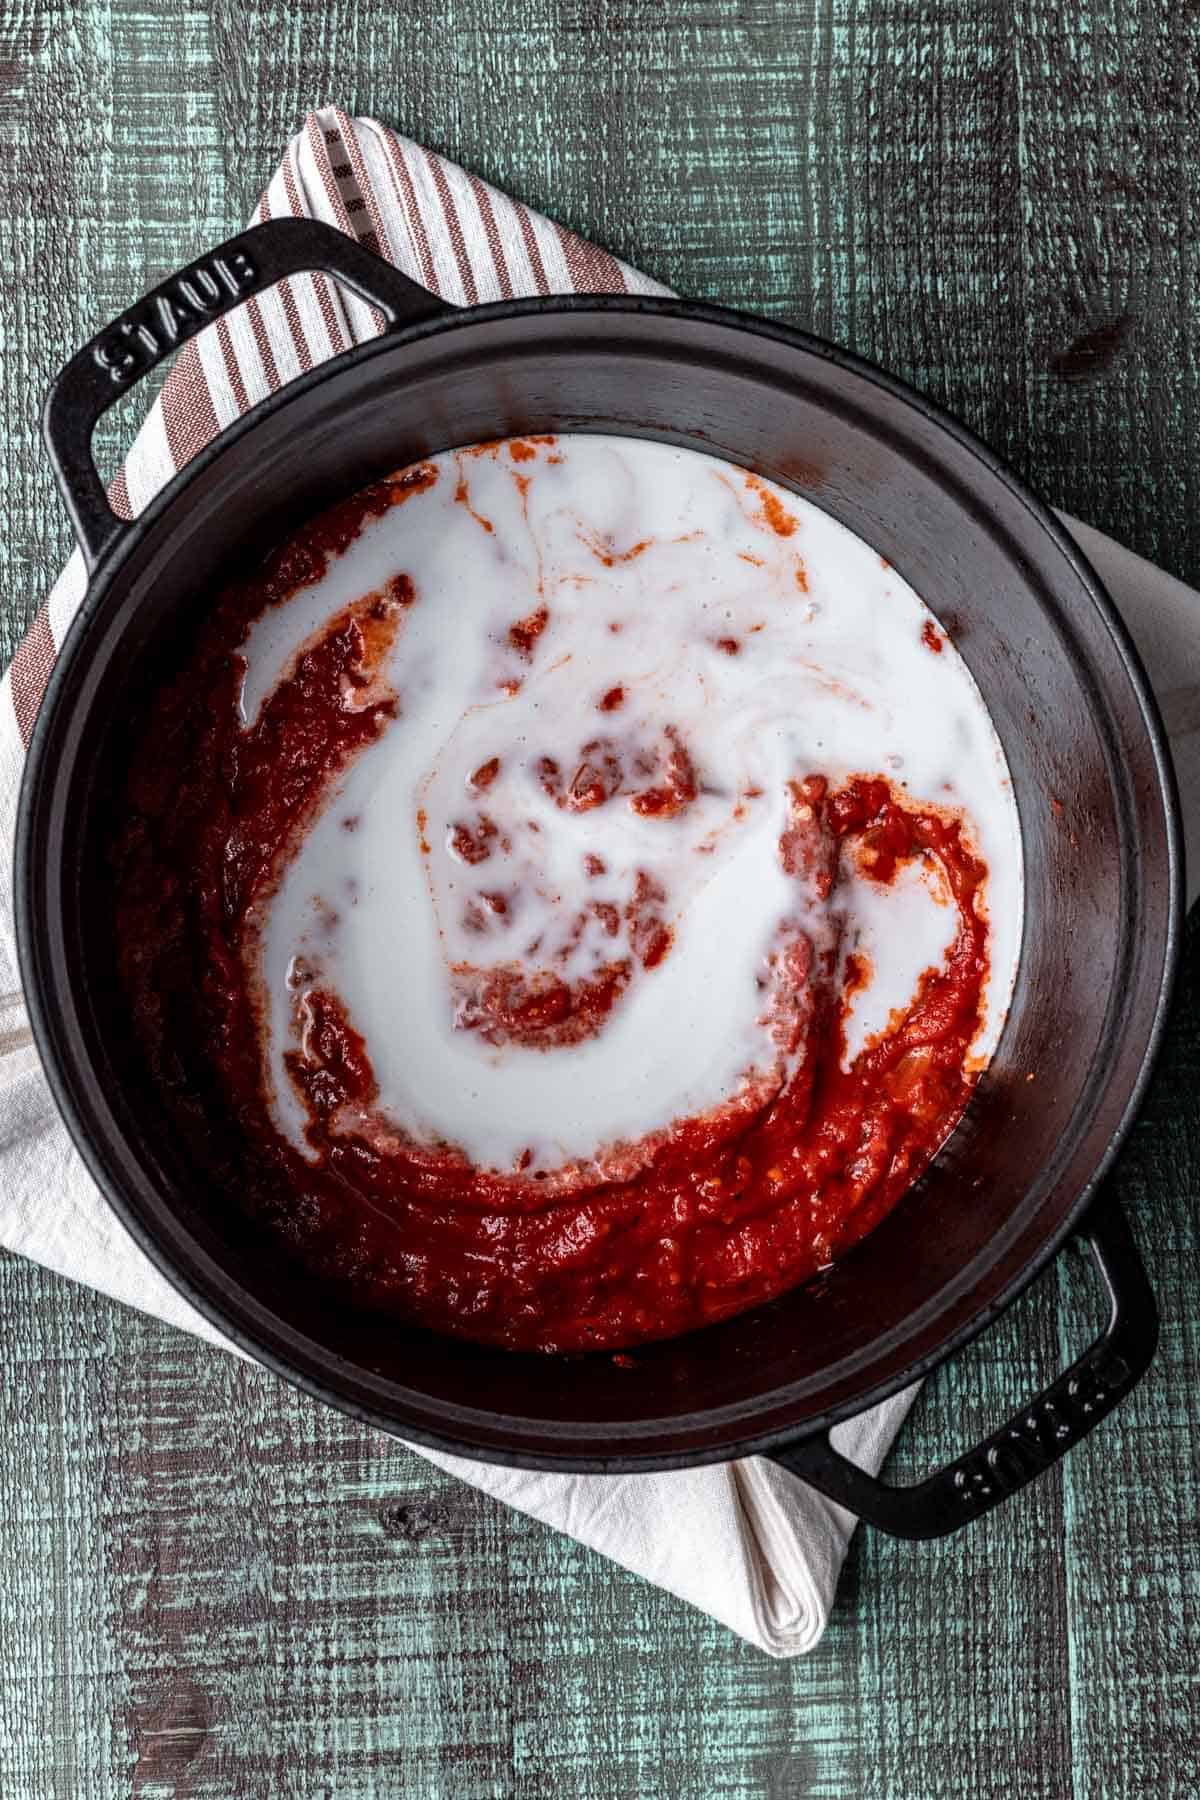 Tomato sauce mixed with coconut cream in a black pot.